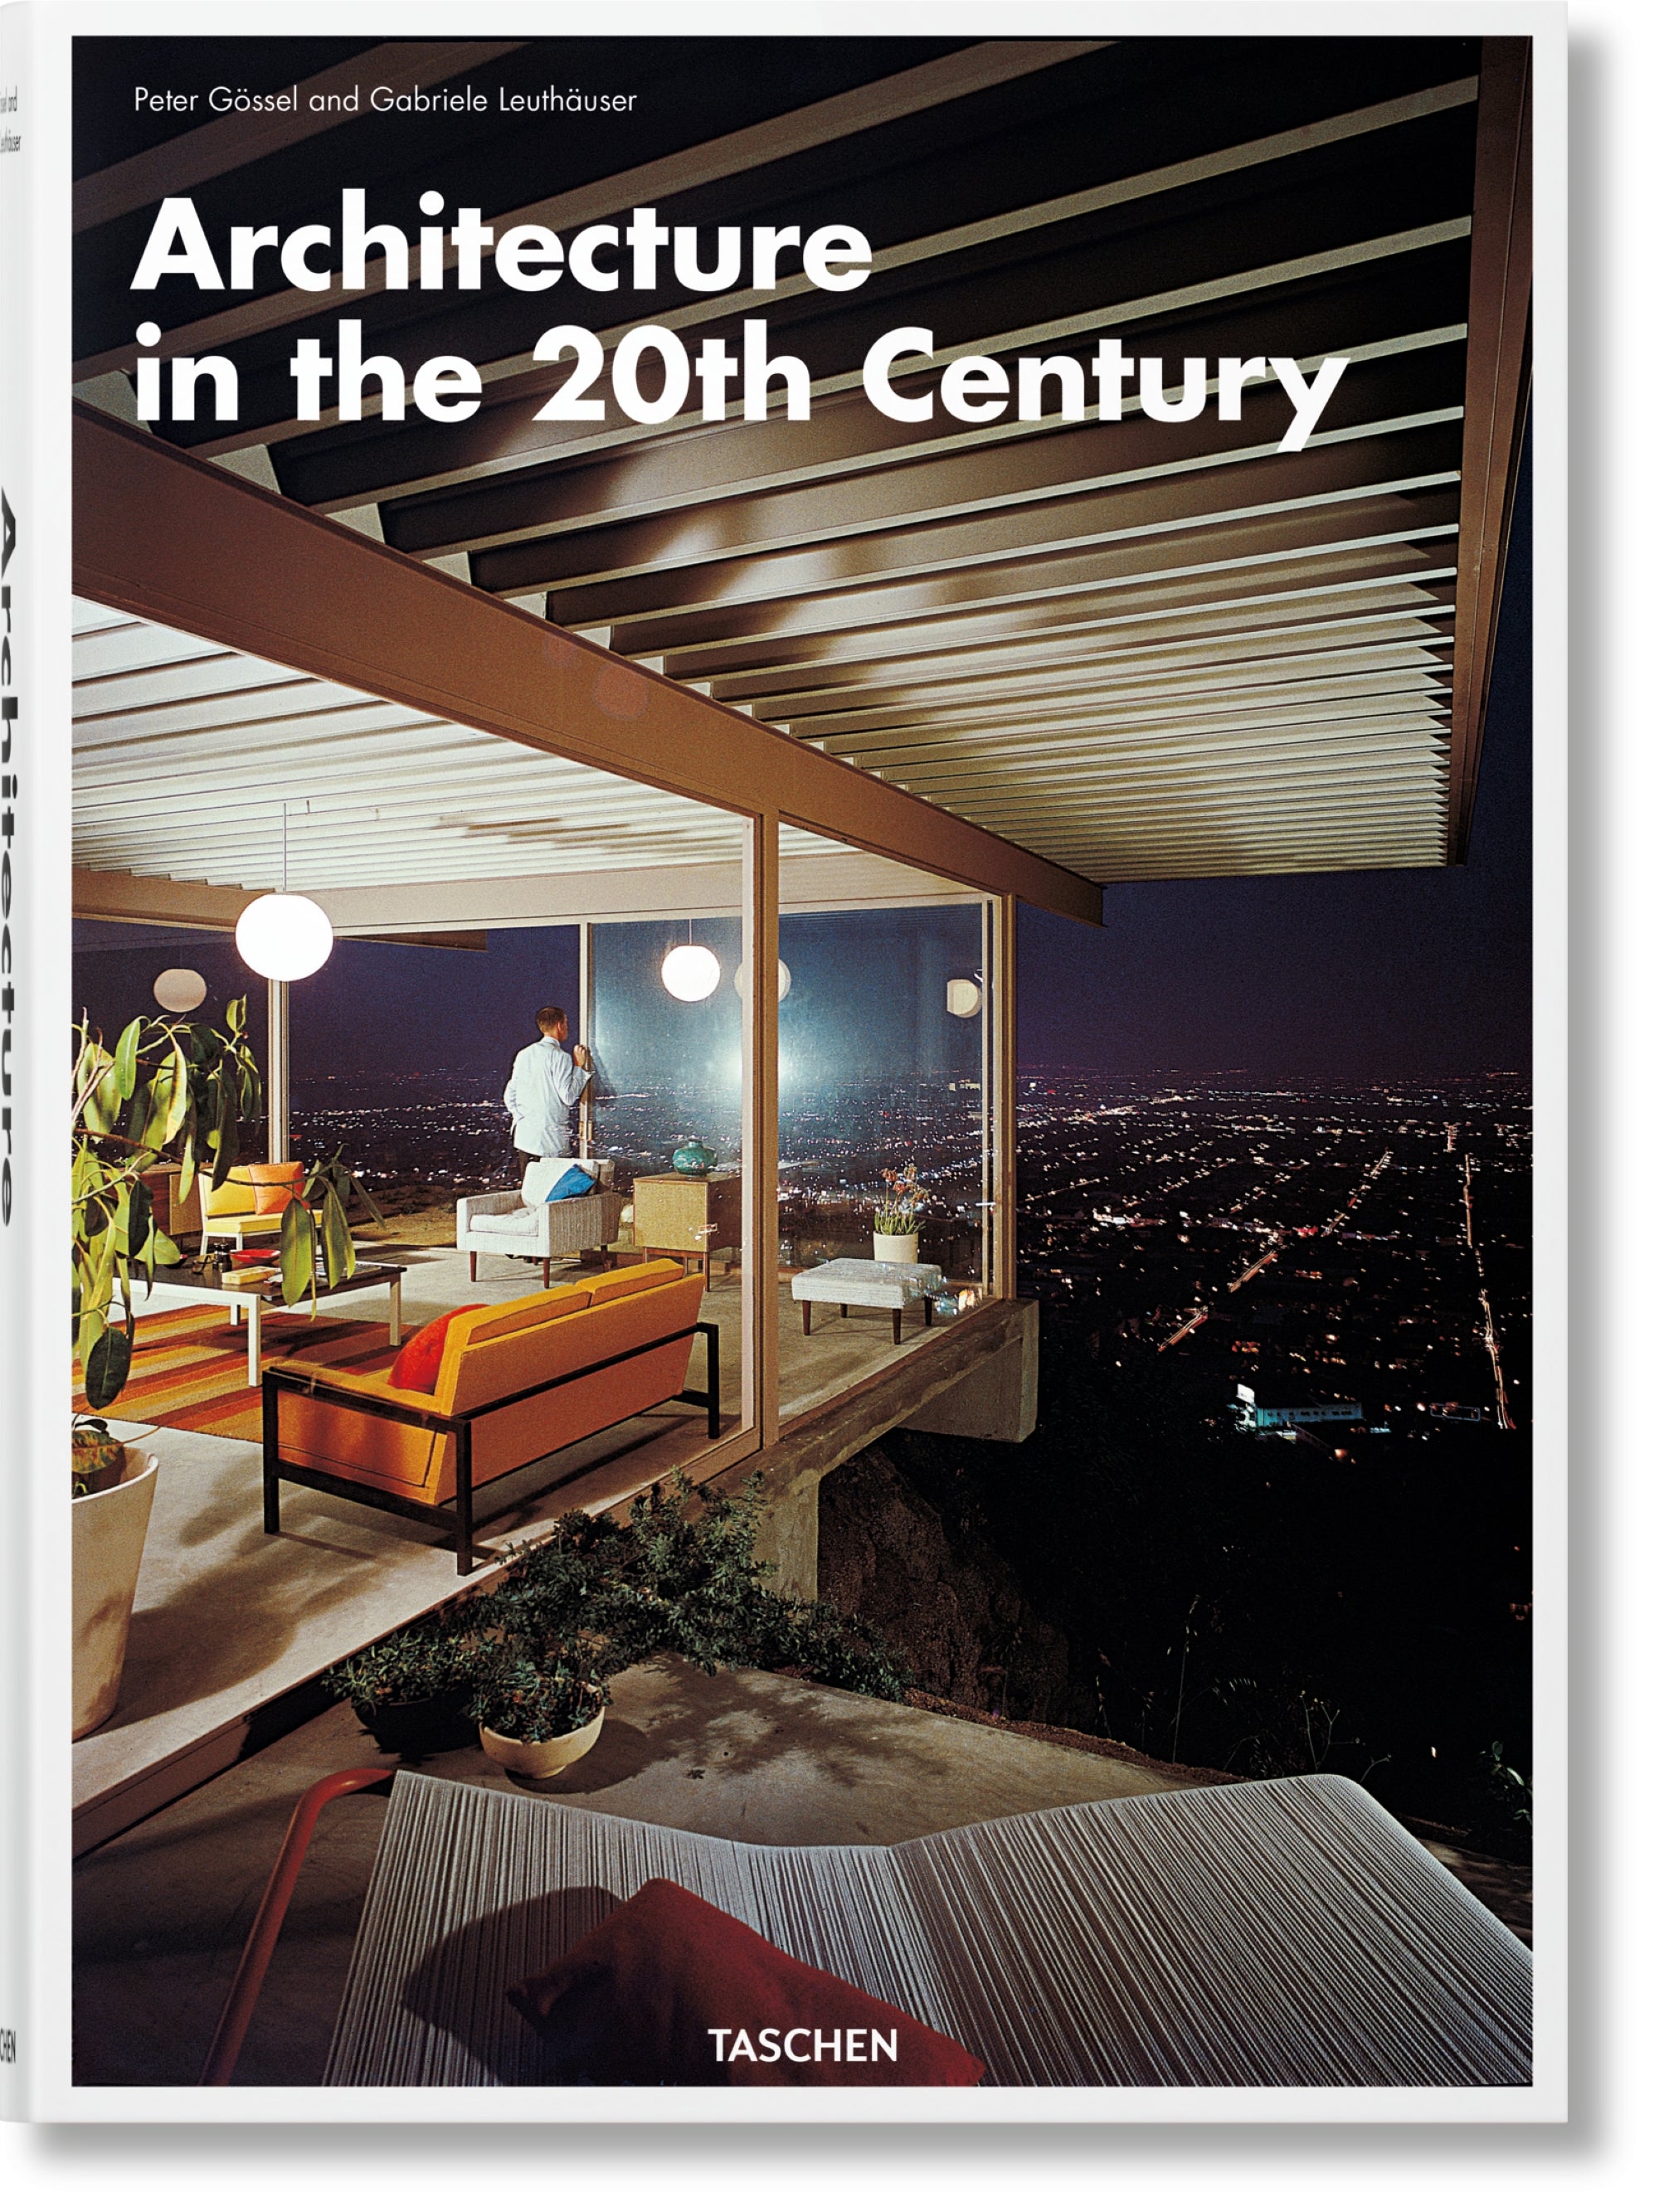 Architecture of the 20th Century